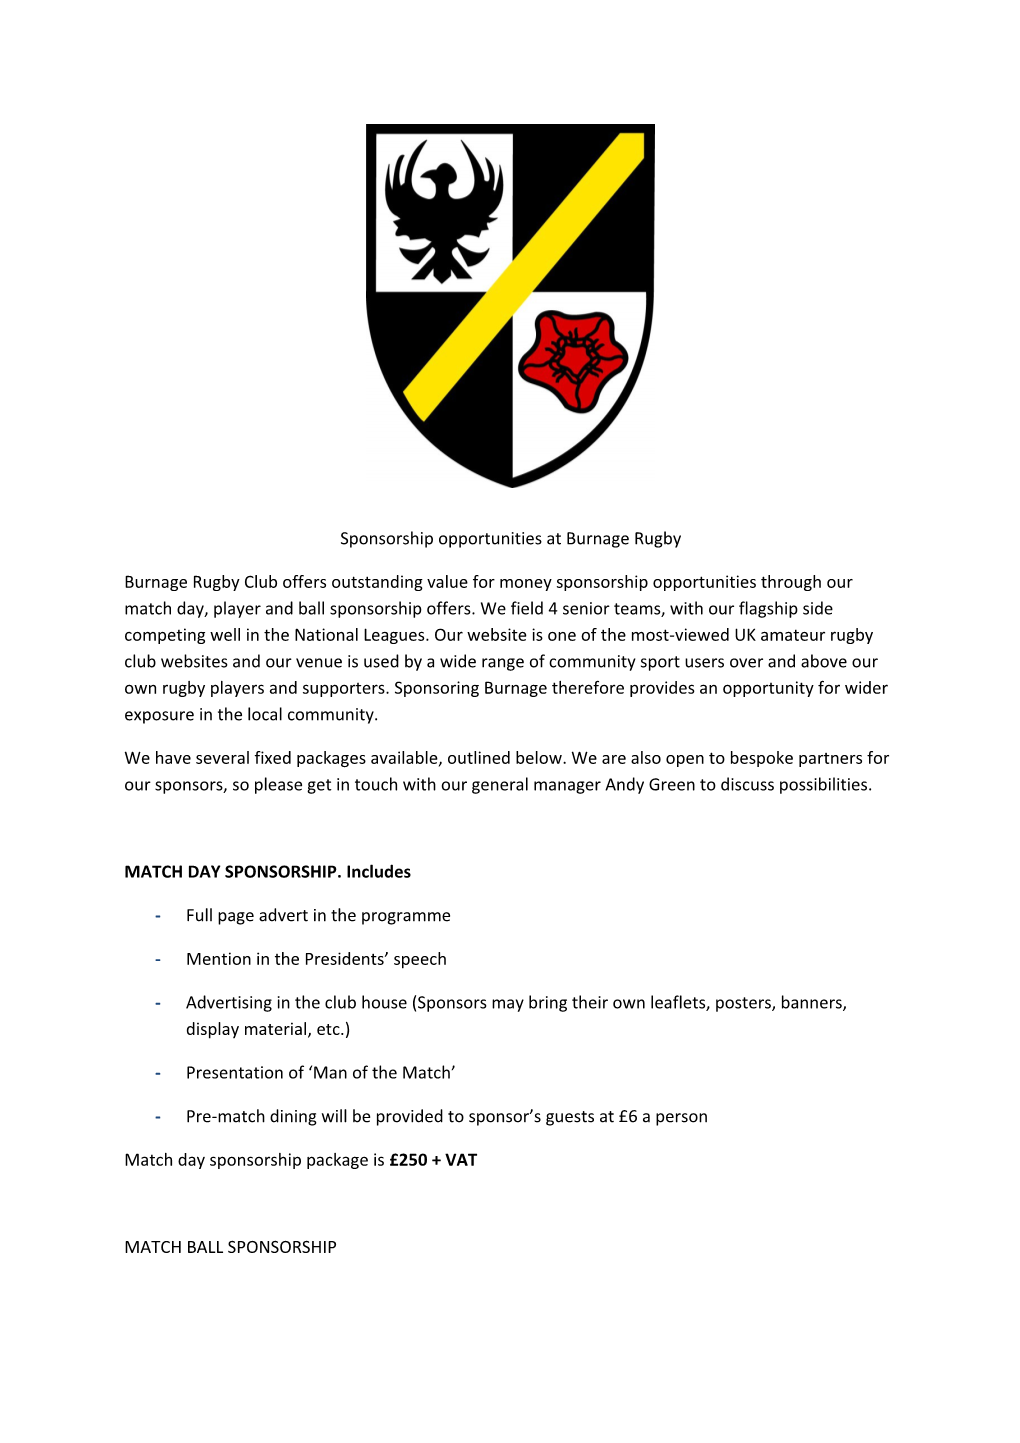 Sponsorship Opportunities at Burnage Rugby